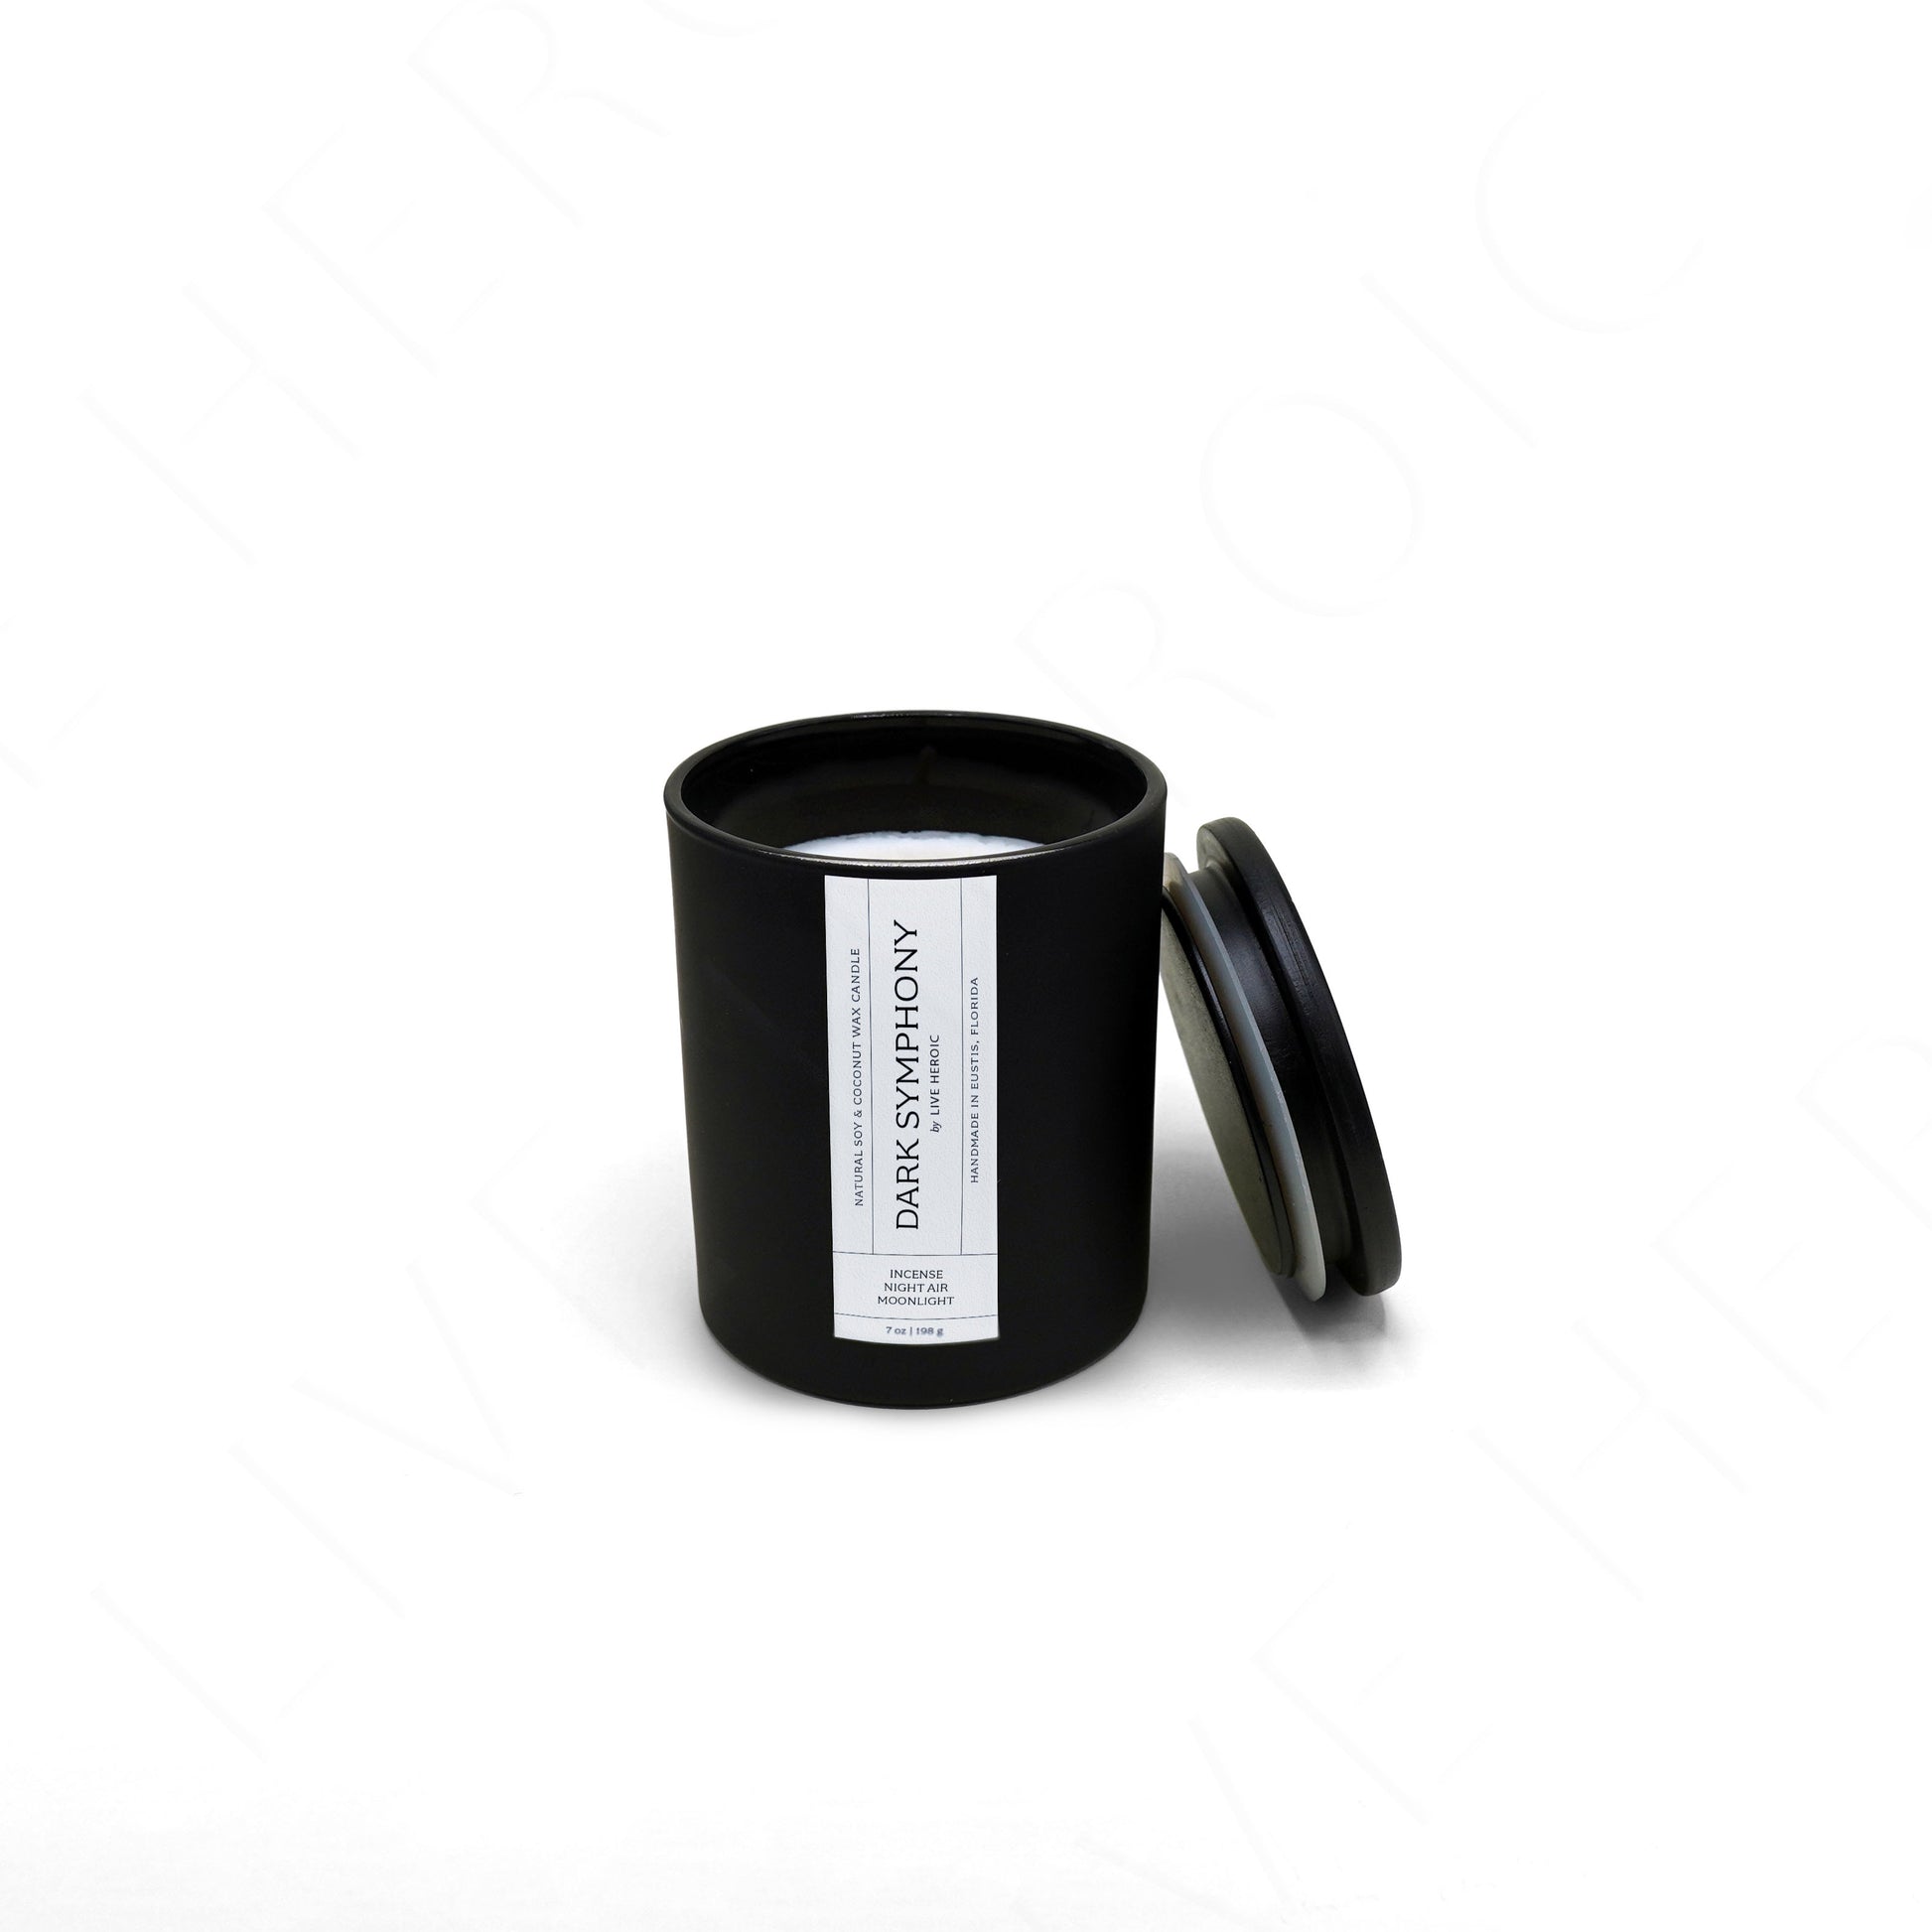 Dark Symphony | 7 oz Scented Coconut & Soy Wax Candle by Live Heroic